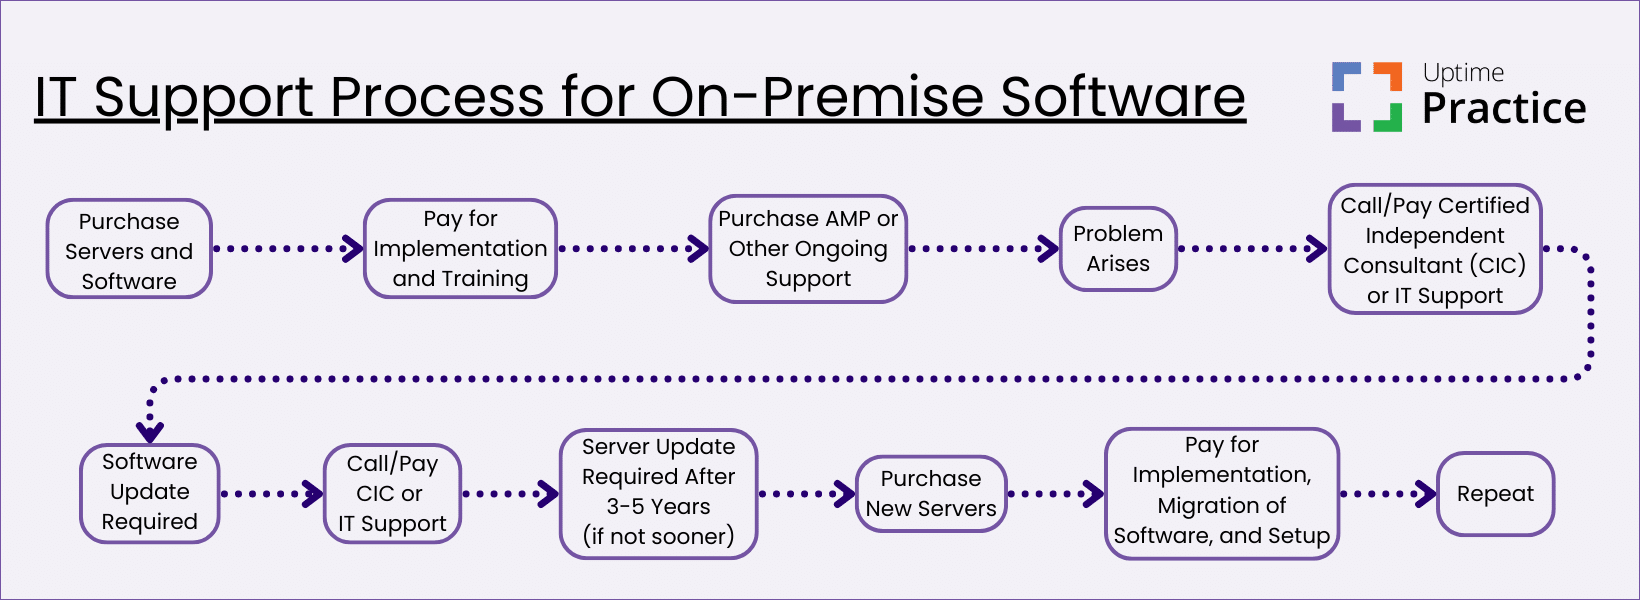 IT Support On-Premise